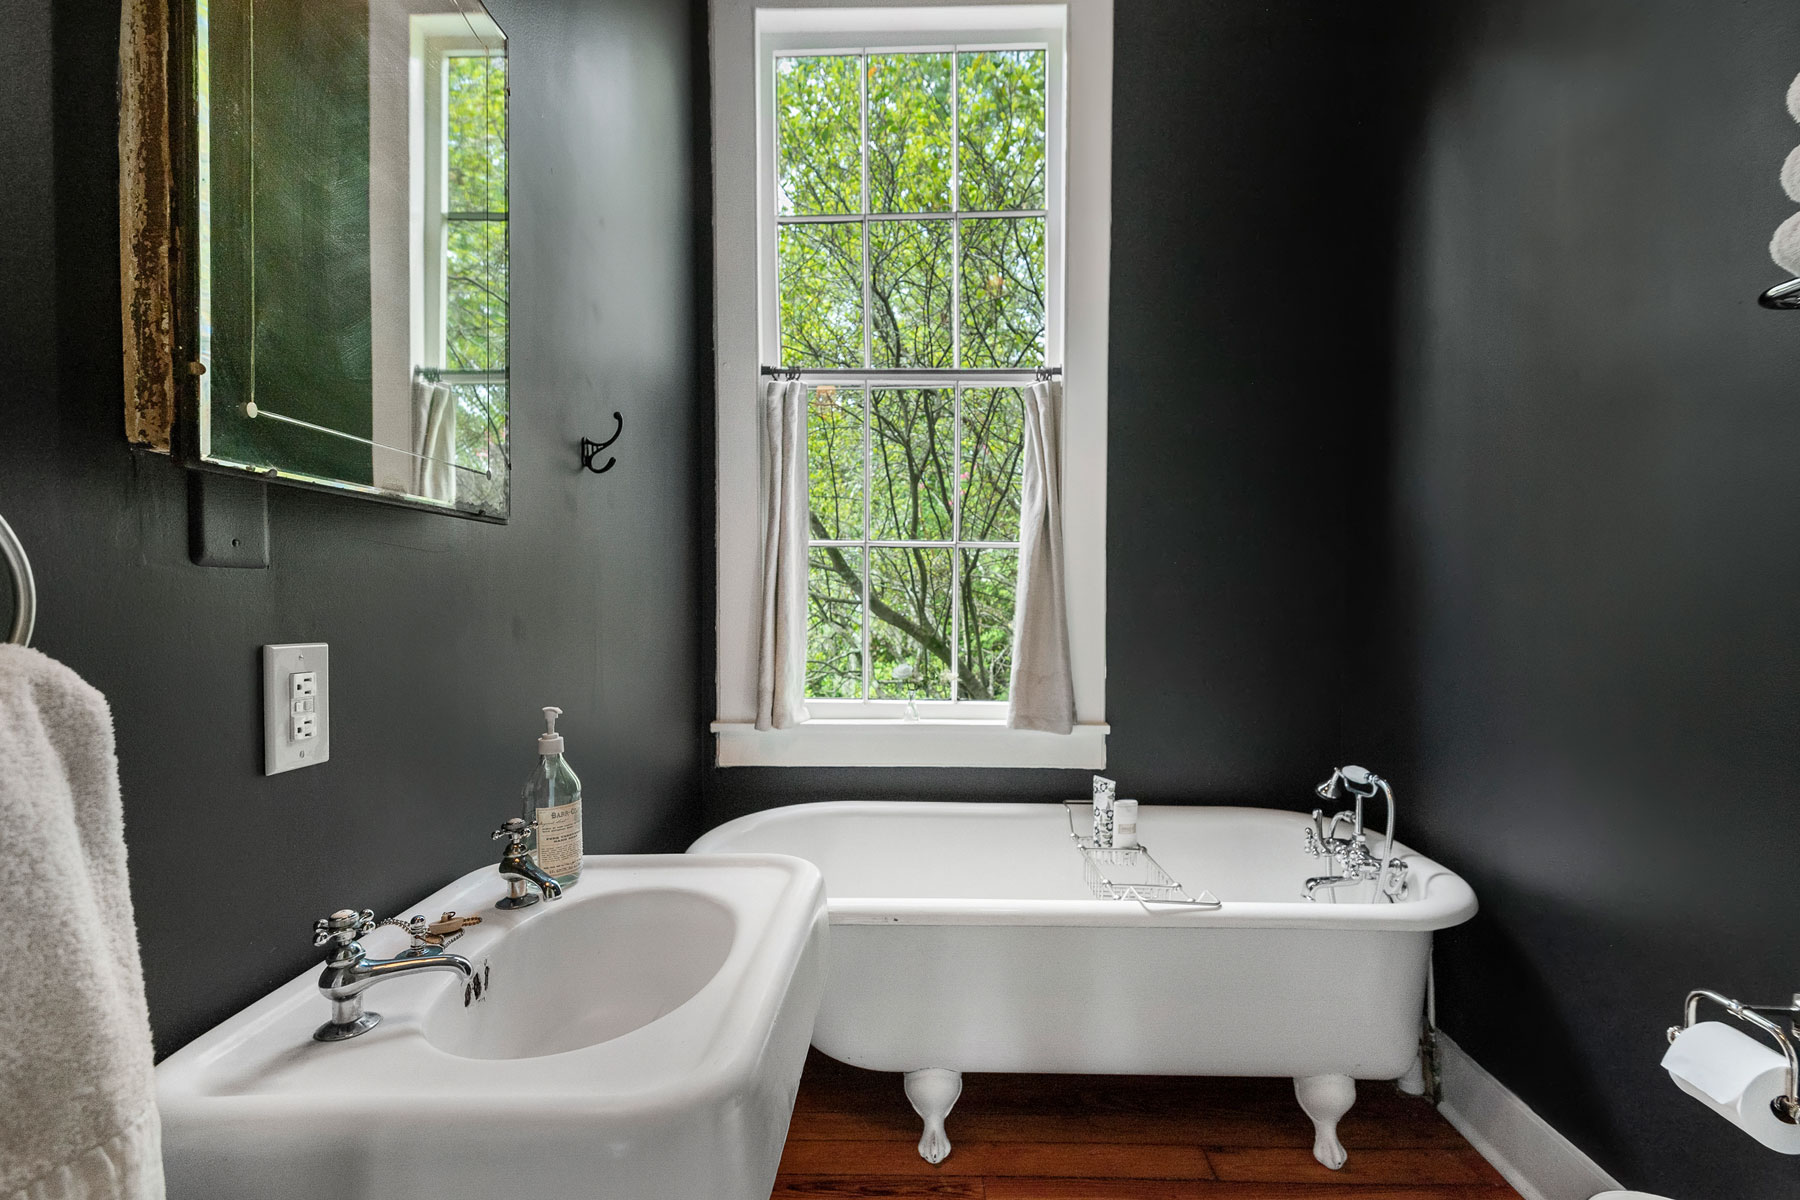 Vintage bath renovation with freestanding claw foot tub and pedestal sink